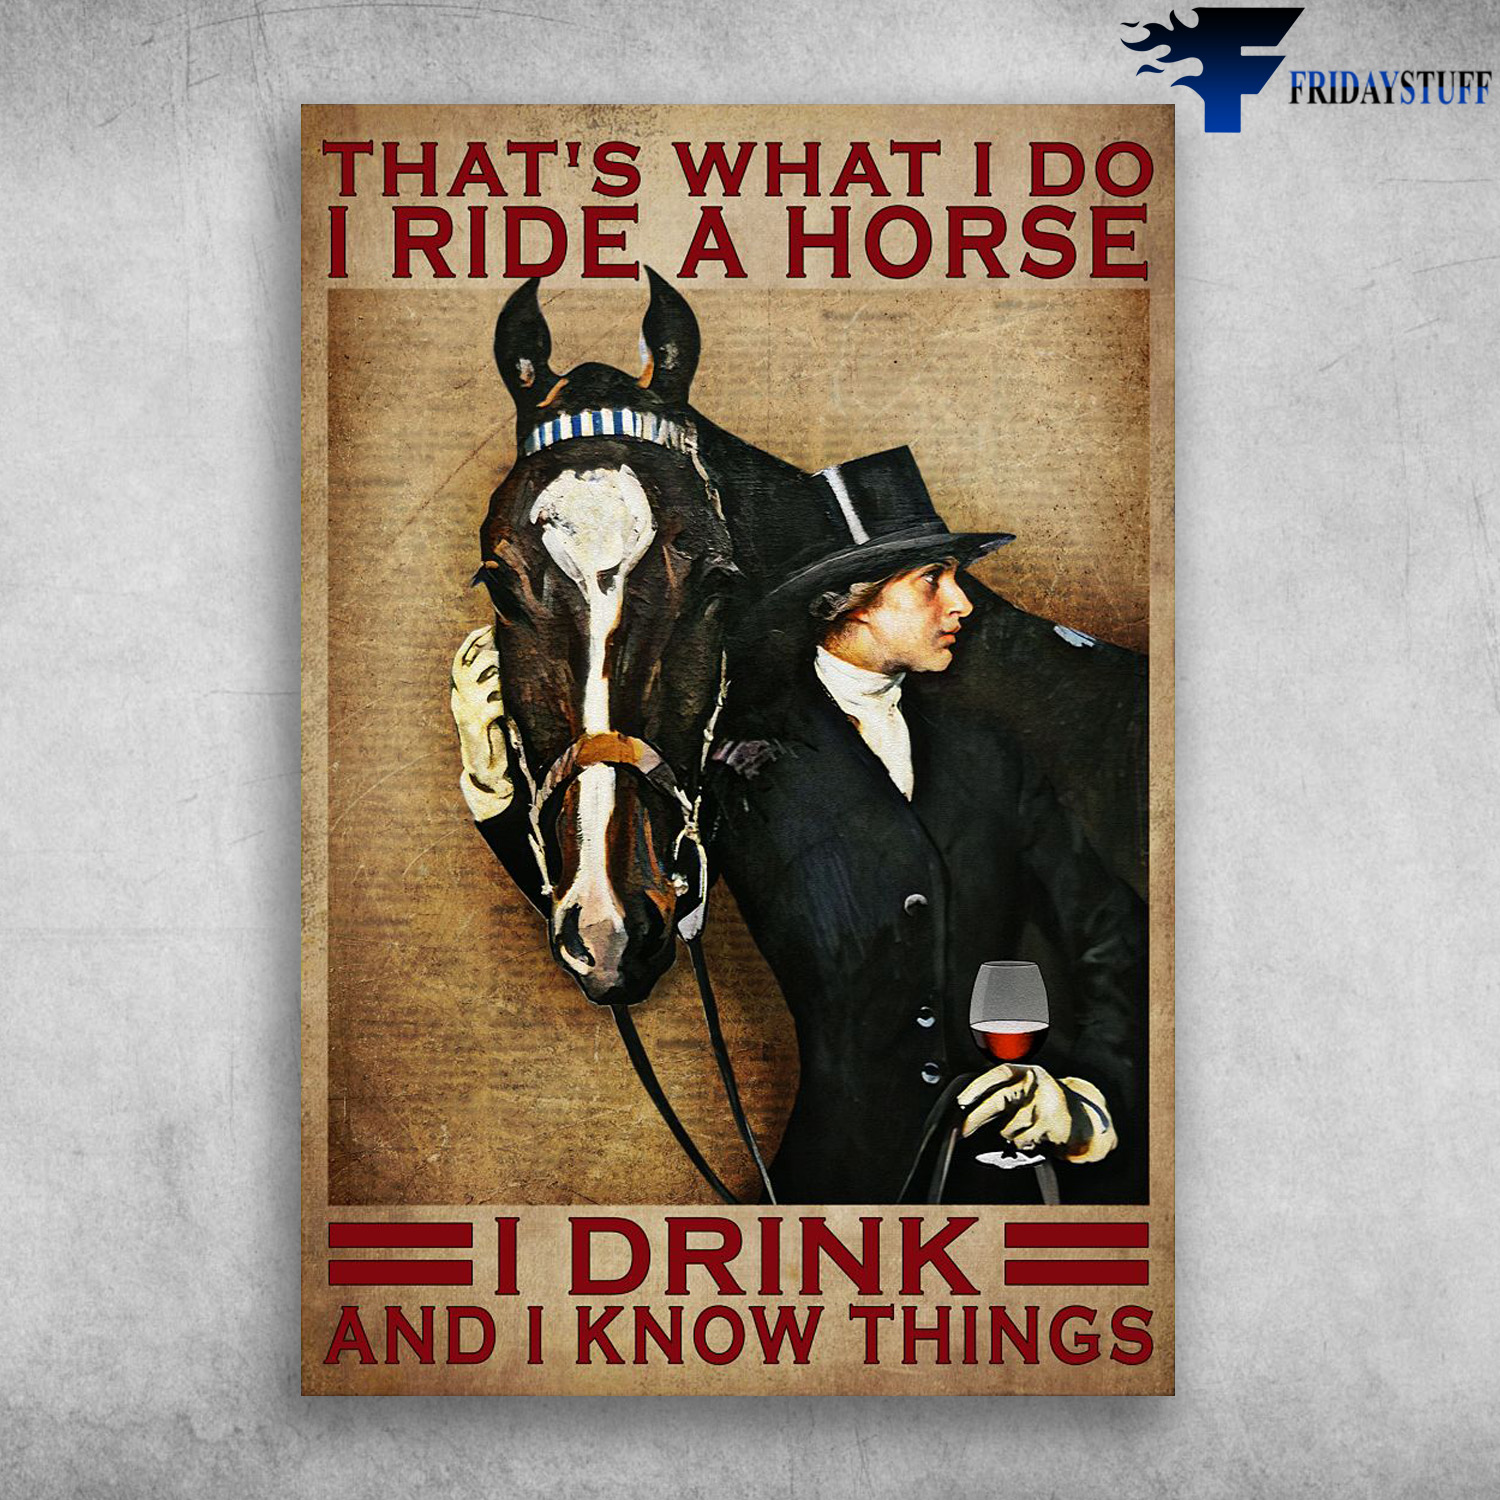 Lady Wine And The Horse - That's What I Do, I Ride A Horse, I Drink And I Know Things